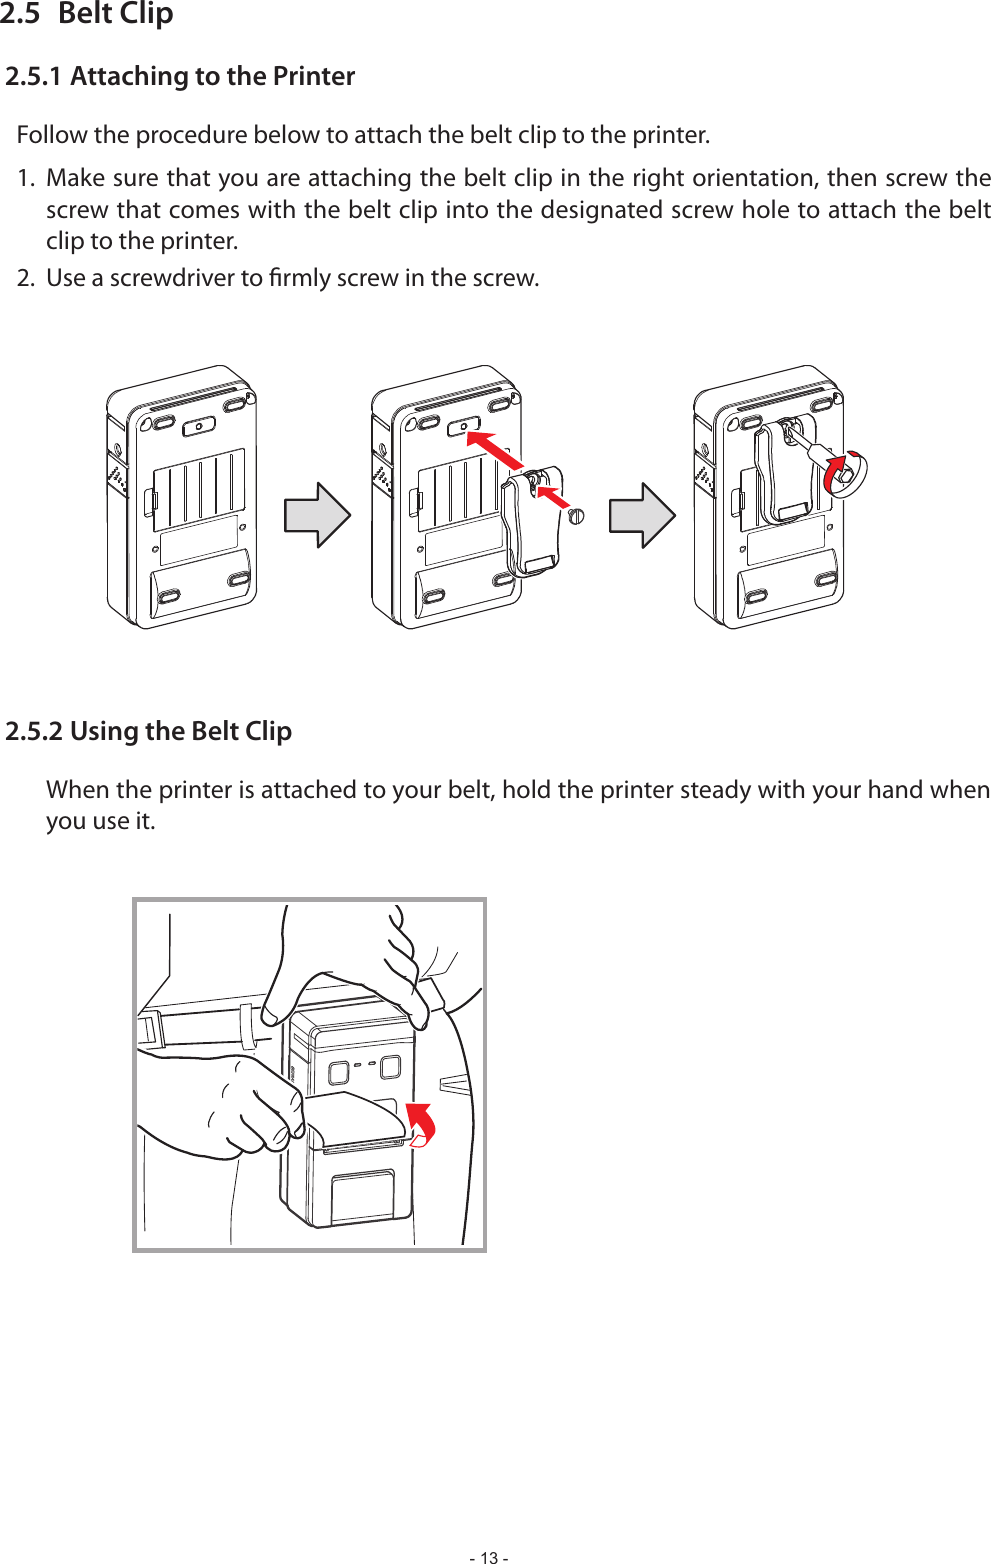 - 13 -2.5  Belt Clip2.5.1 Attaching to the PrinterFollow the procedure below to attach the belt clip to the printer.1. Make sure that you are attaching the belt clip in the right orientation, then screw the screw that comes with the belt clip into the designated screw hole to attach the belt clip to the printer.2.  Use a screwdriver to rmly screw in the screw.2.5.2 Using the Belt Clip  When the printer is attached to your belt, hold the printer steady with your hand when you use it.